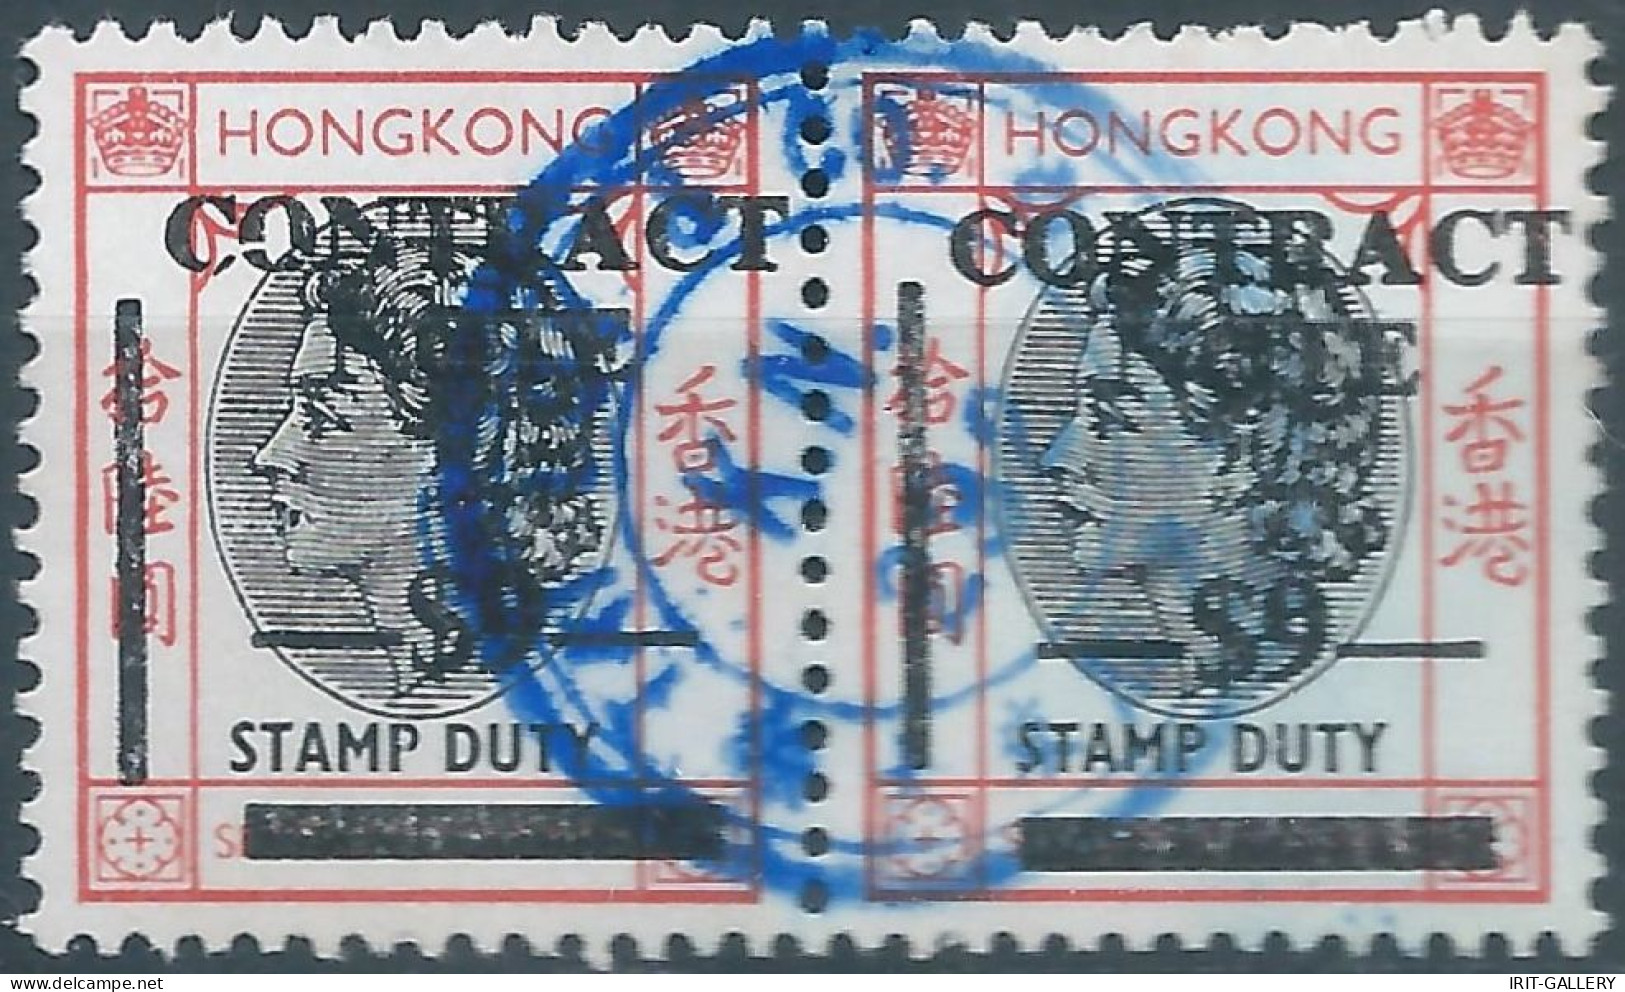 Great Britain-ENGLAND,HONG KONG Revenue Stamp DUTY Contract $9 In Pairs With The Central Cancelled - Francobollo Fiscali Postali